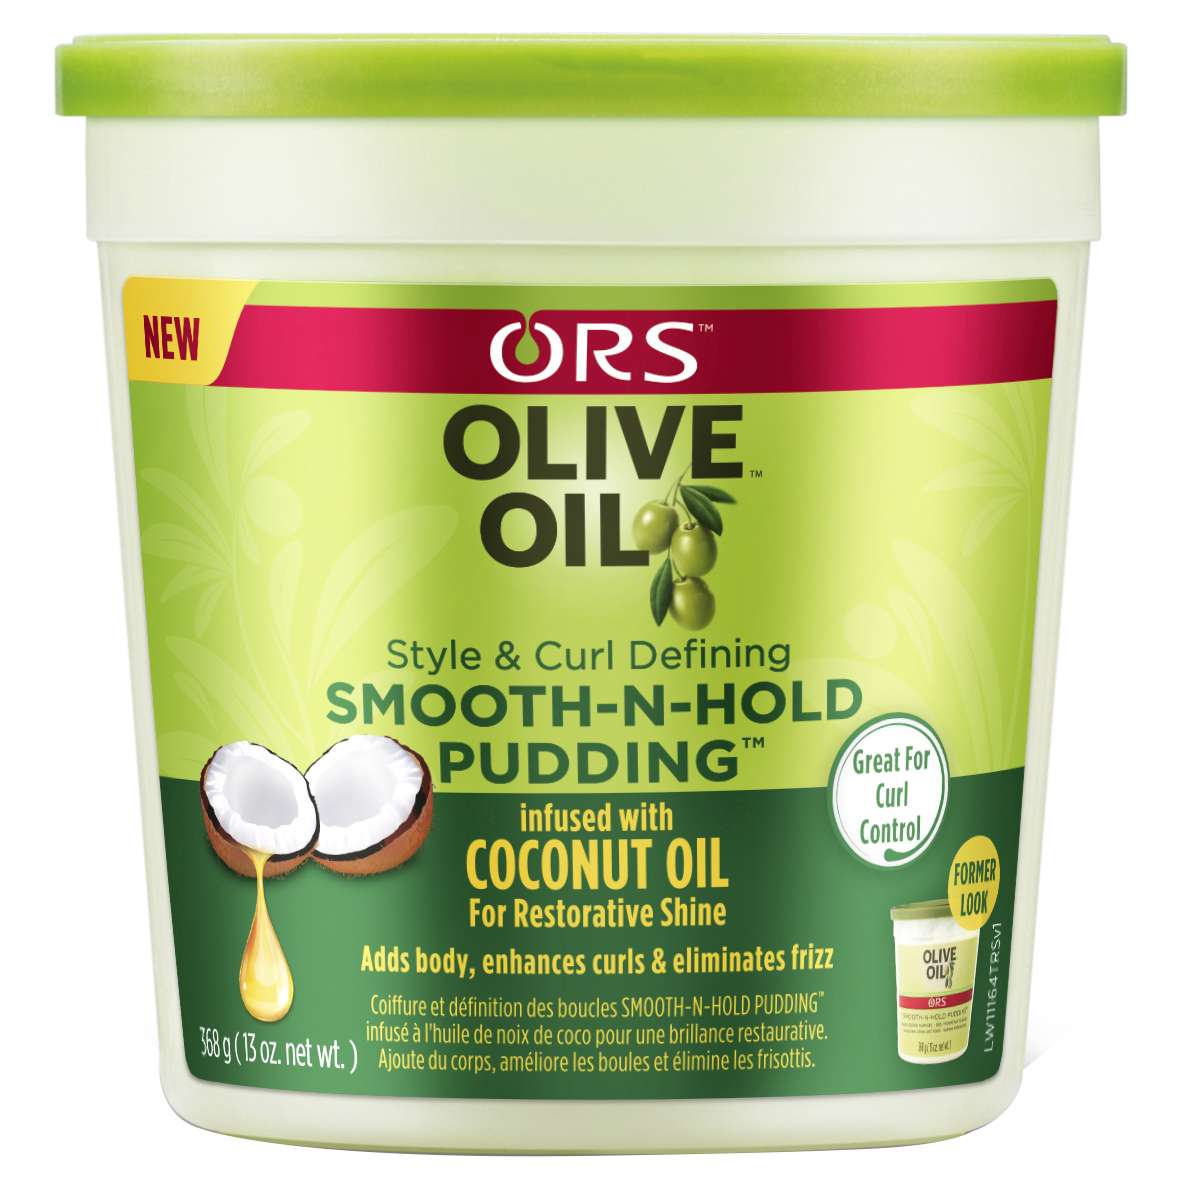 Ors Olive Oil Smooth N Hold Pudding